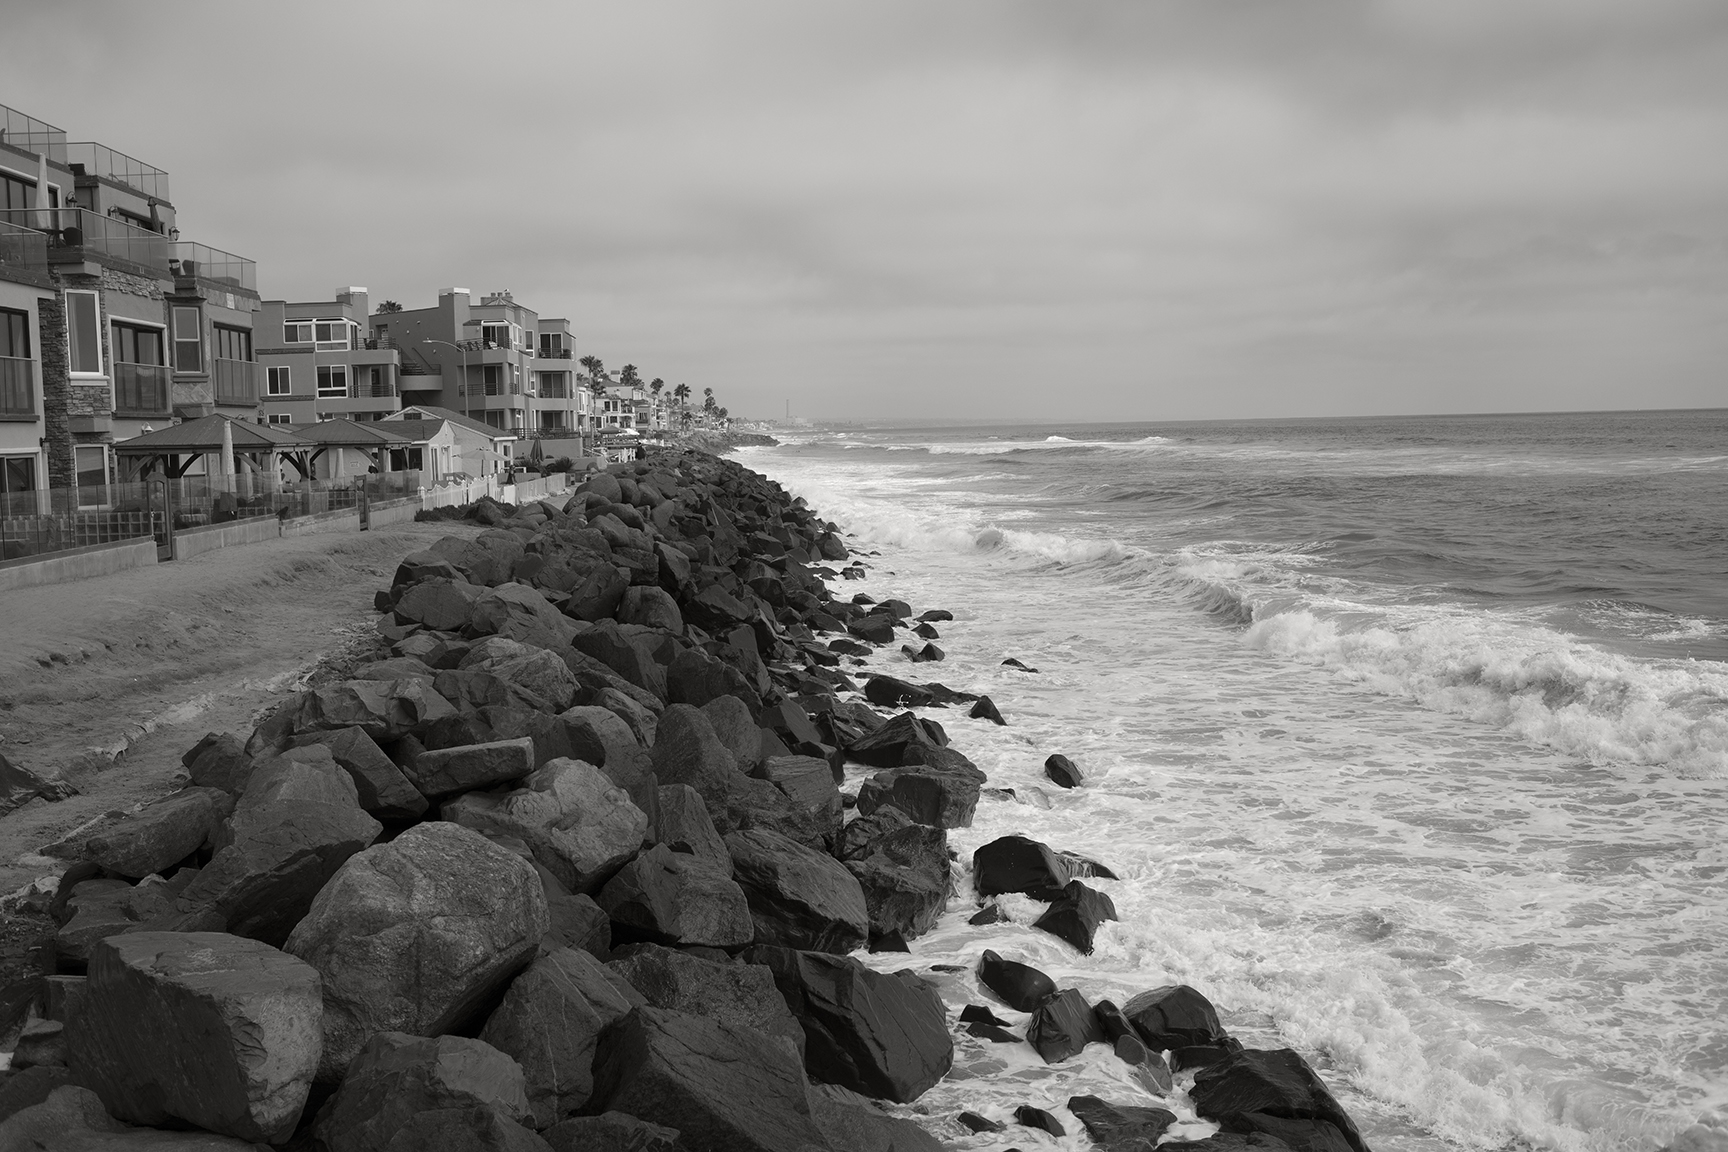 Riprap-lined beaches along the southern coast of Oceanside, California. This image was taken at a medium high tide in August 2019. Much of the southern coast of Oceanside has a similar profile, with riprap and short to non-existent beaches © 2019 Ryan Anderson.